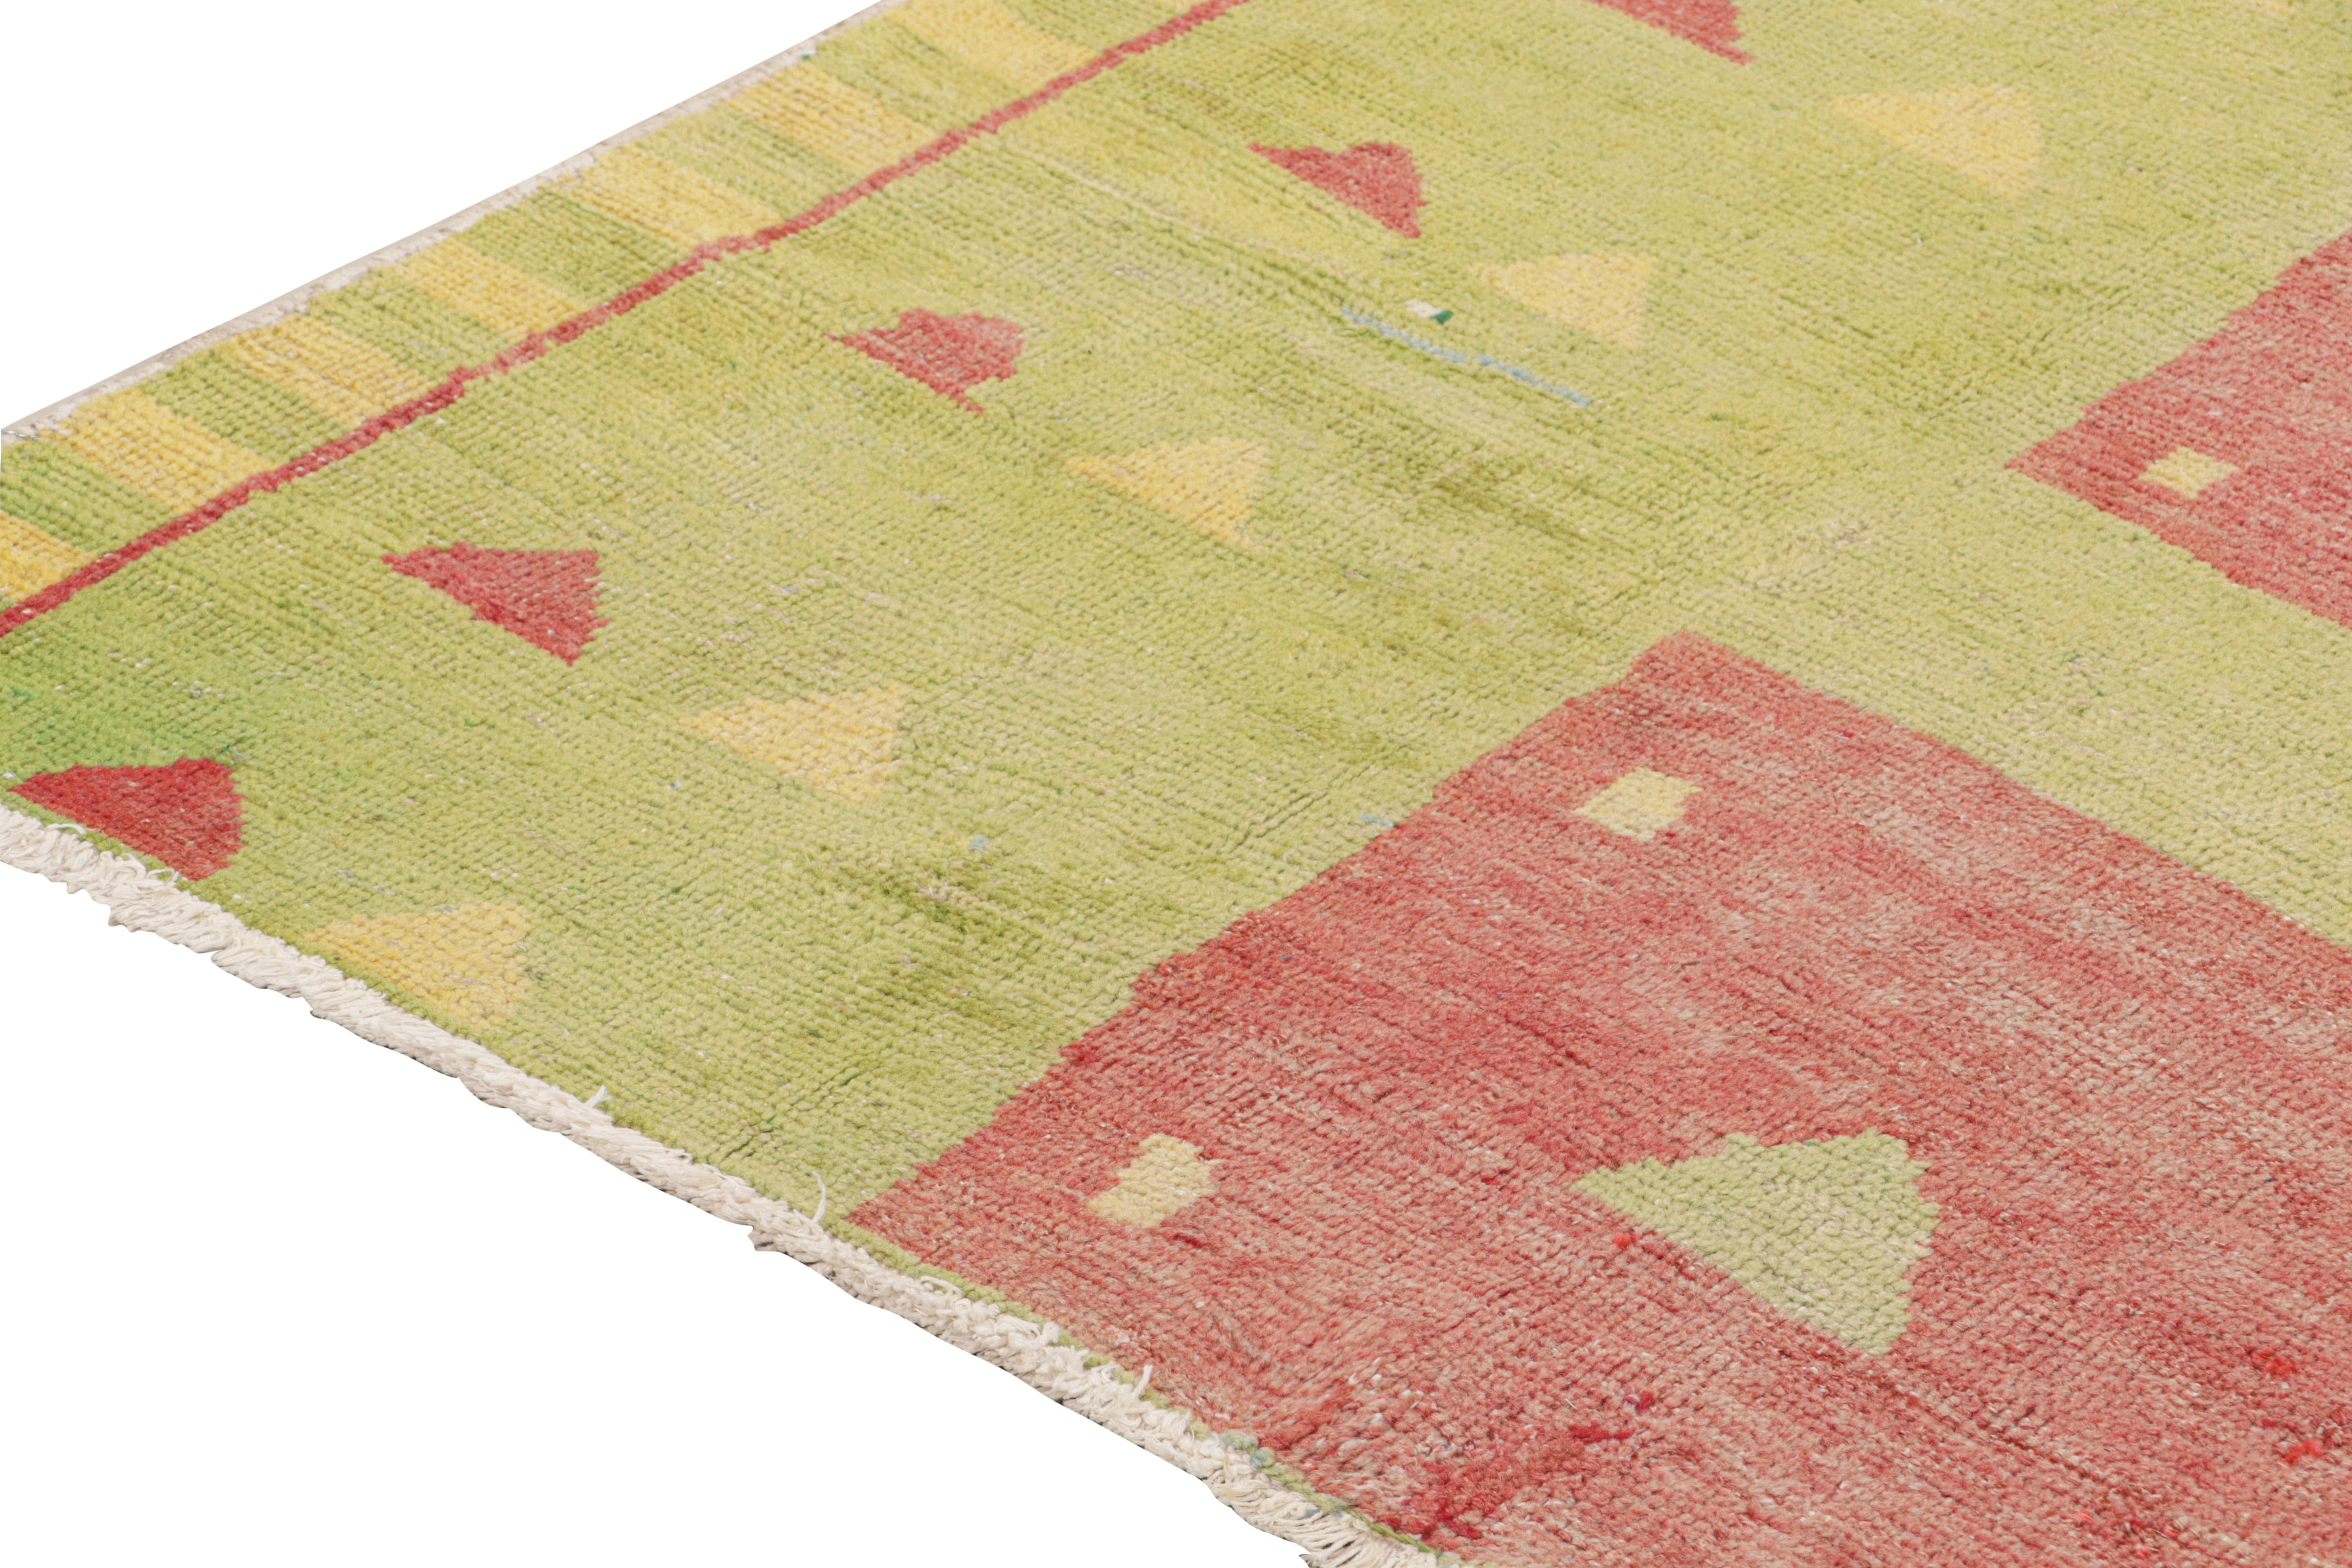 Vintage Zeki Müren Rug in Green, Red and Gold Geometric Patterns by Rug & Kilim In Good Condition For Sale In Long Island City, NY